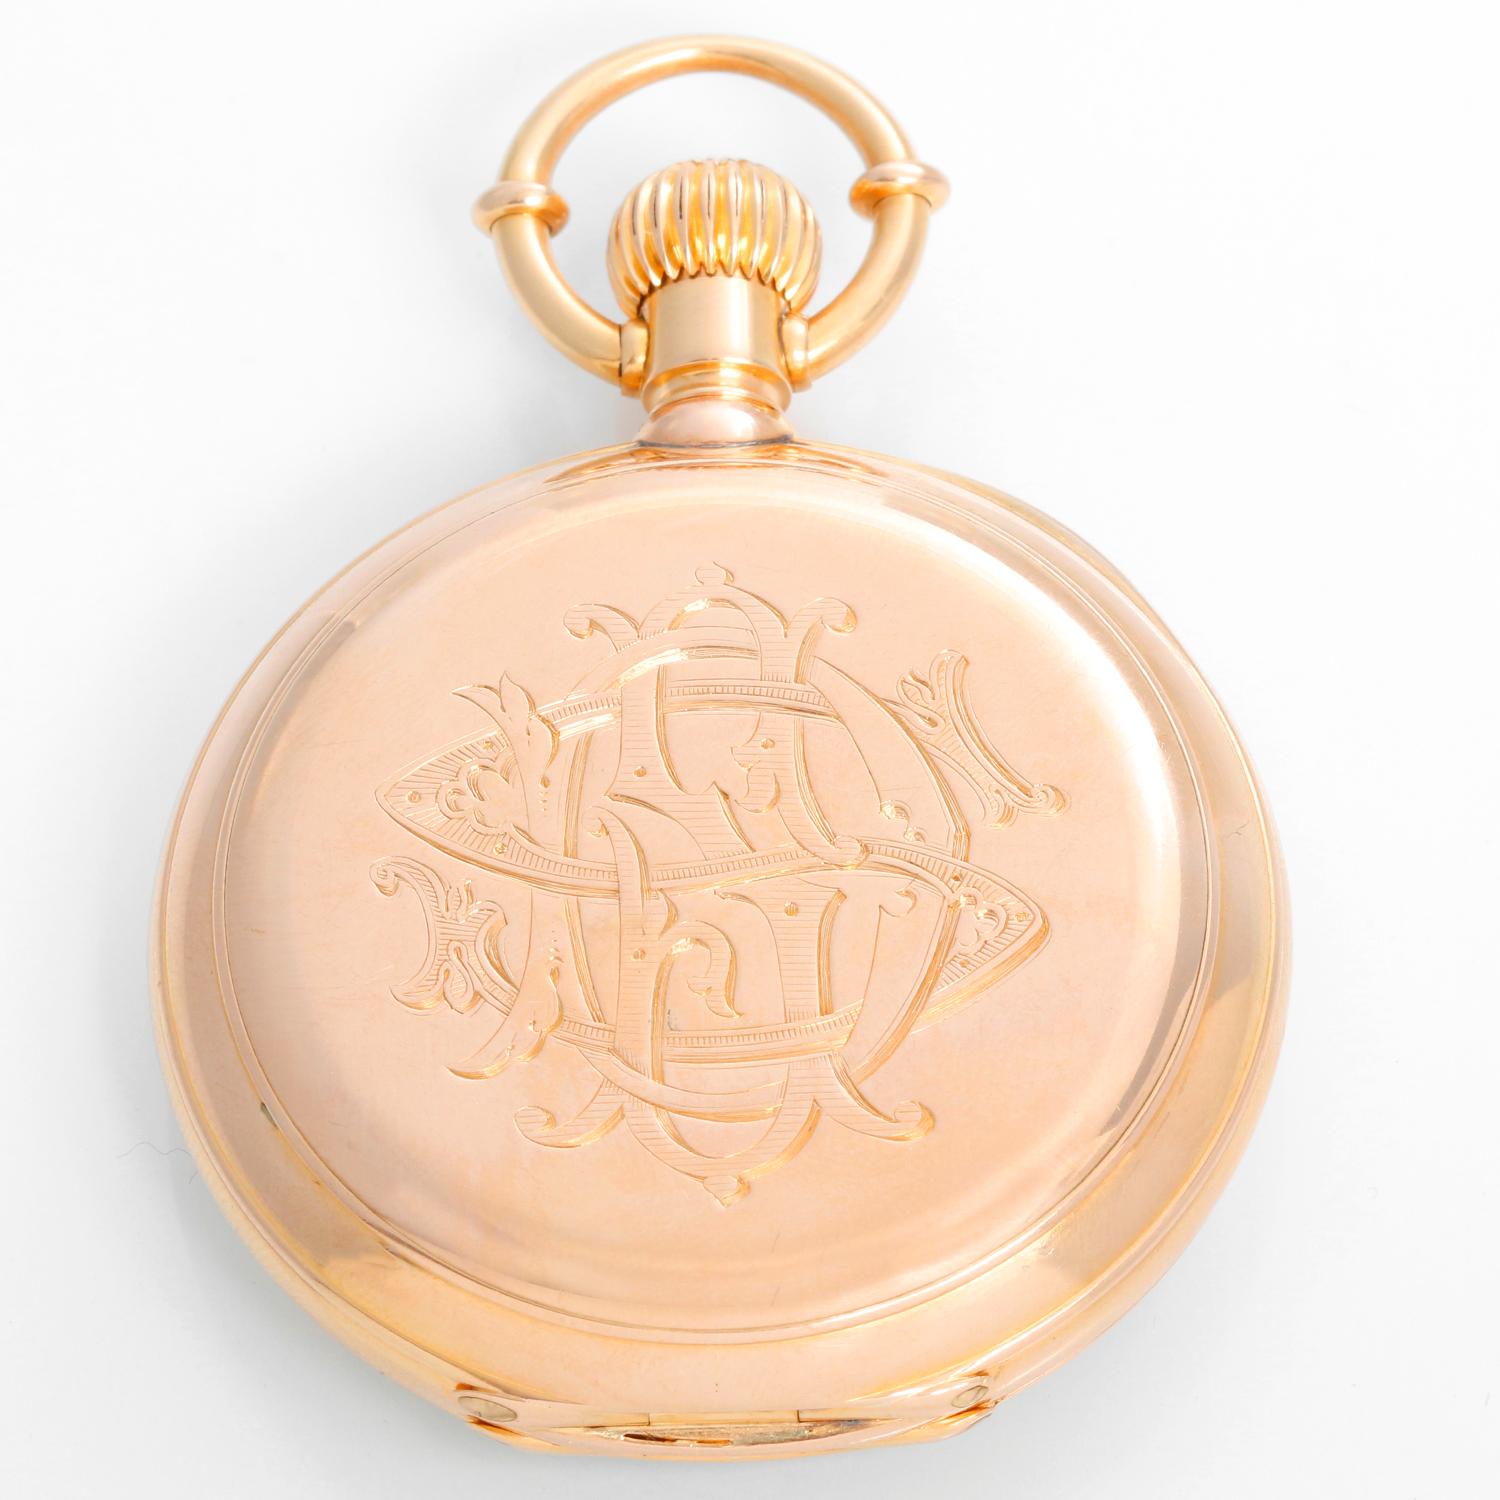 Jules Jurgensen 18K Yellow Gold Oversize Pocket Watch - Manual winding; bow set.. 18K Yellow gold ( 55 mm ) oversize. Heavy case with Jurgensen lips; display back. Enamel white dial with subdial at 6 o'clock. Circa late 1800's - early 1900's.